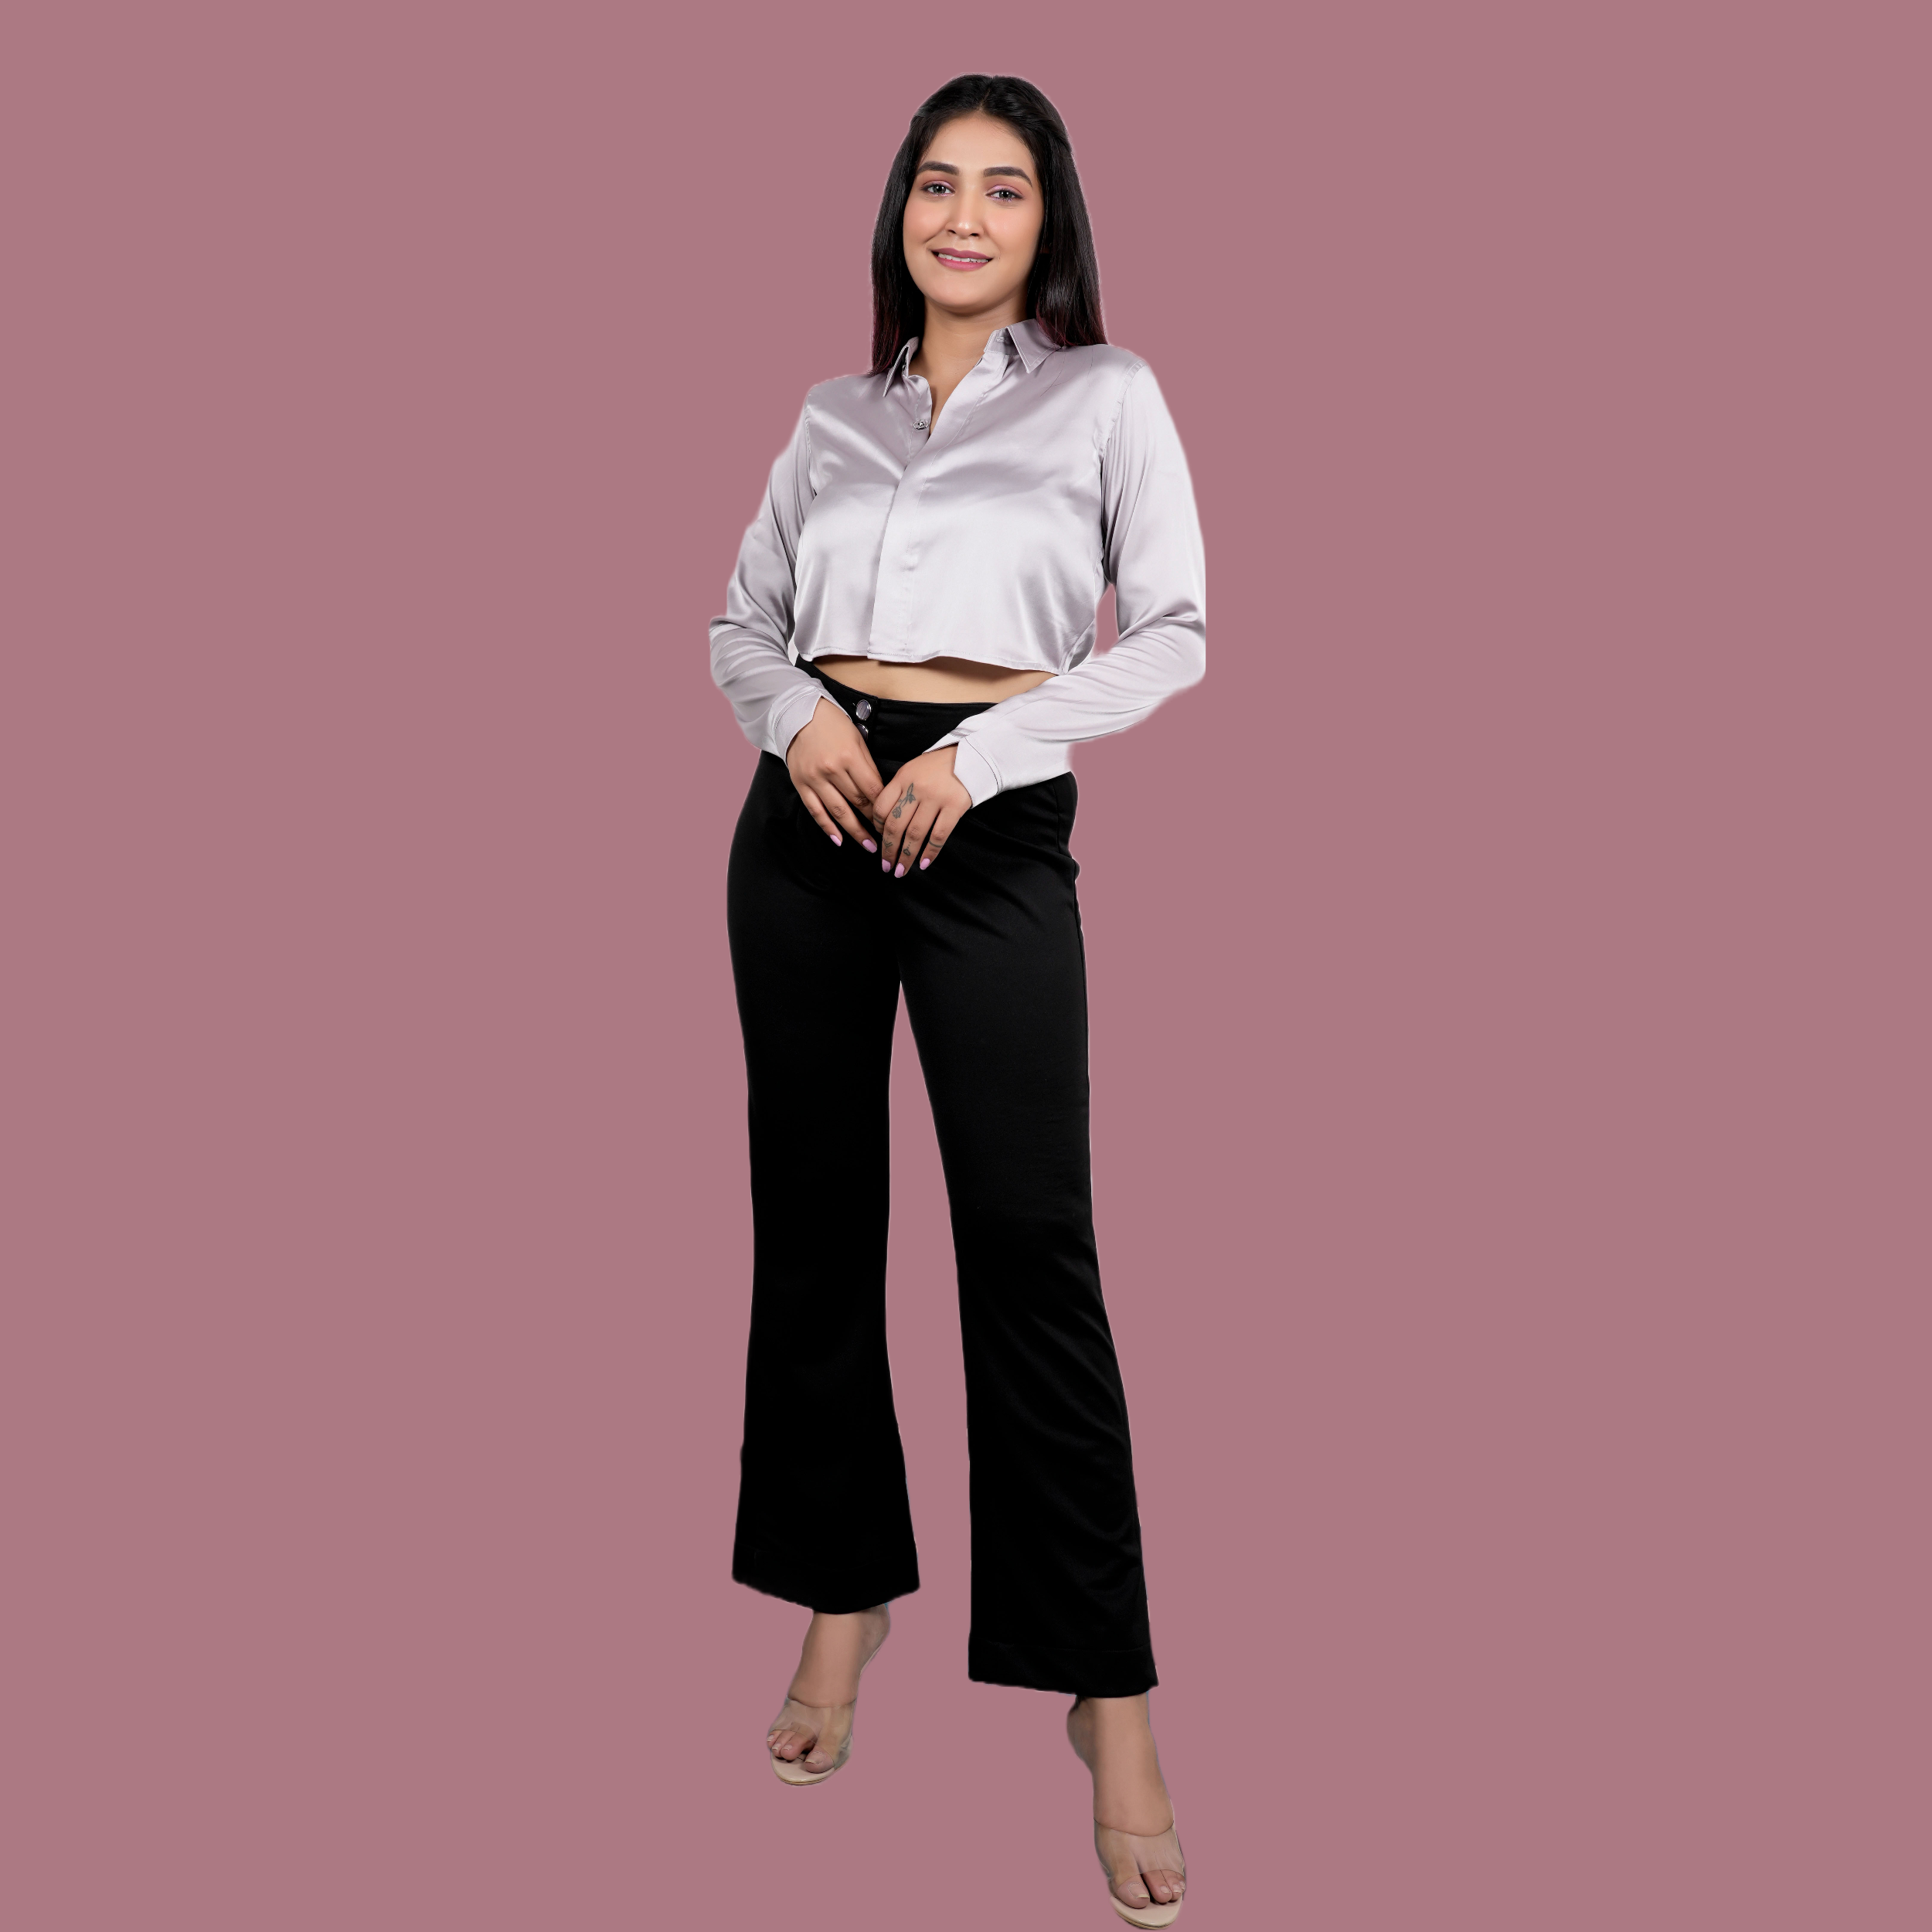 Classy Tail shirt with Bell bottom Trouser